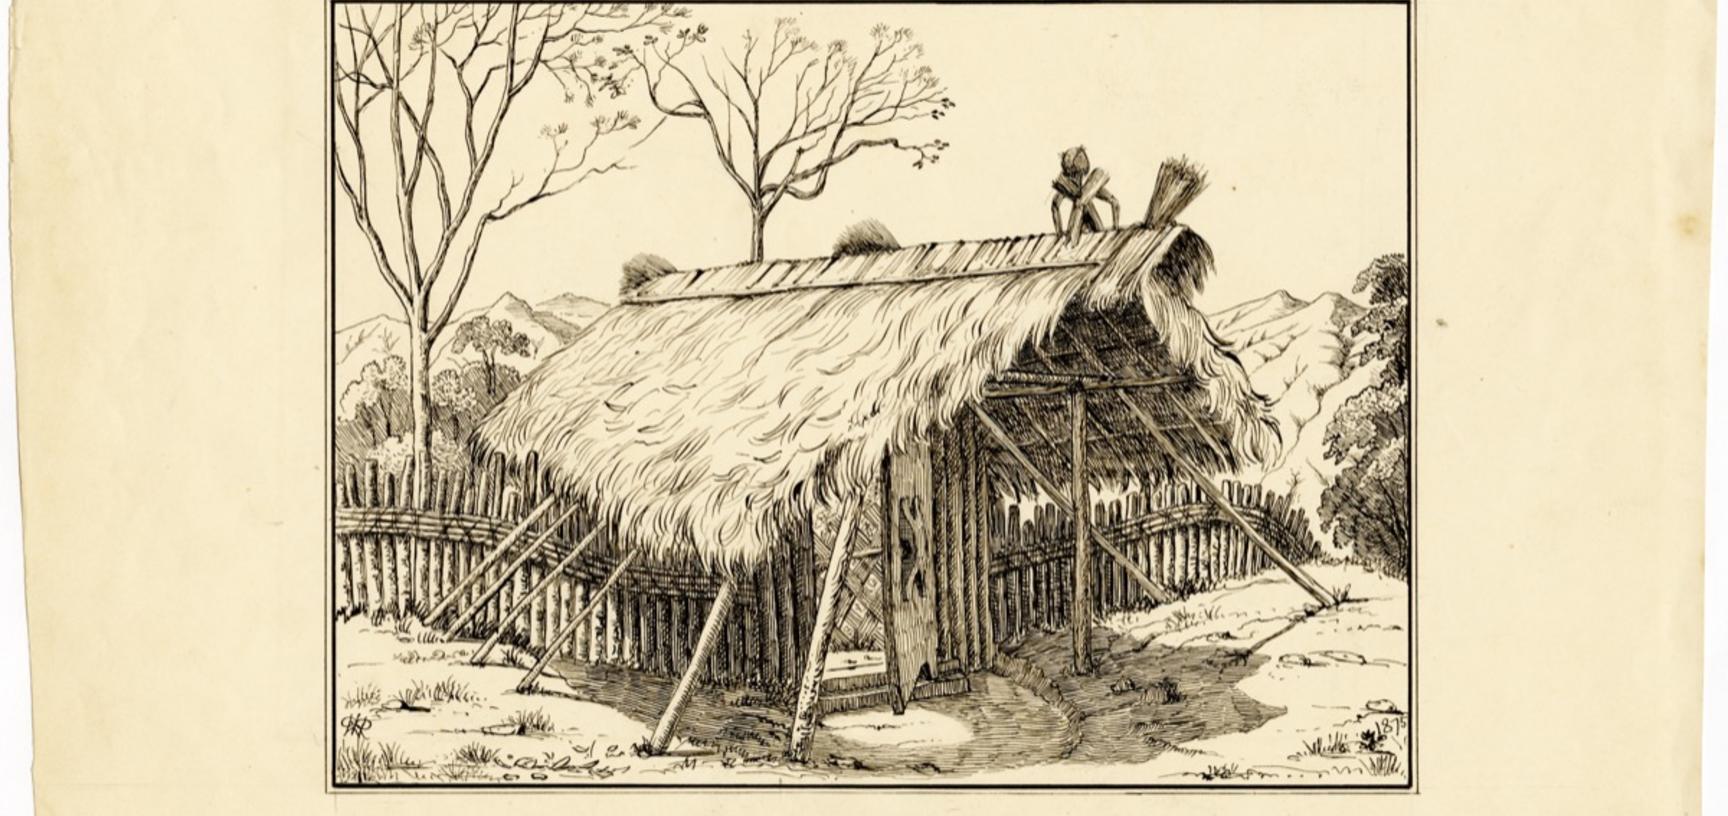 Entrance gate to the Ao Naga village of Dekha Haimong, in the Naga Hills District of Assam, India. Ink drawing by Robert Gosset Woodthorpe. 